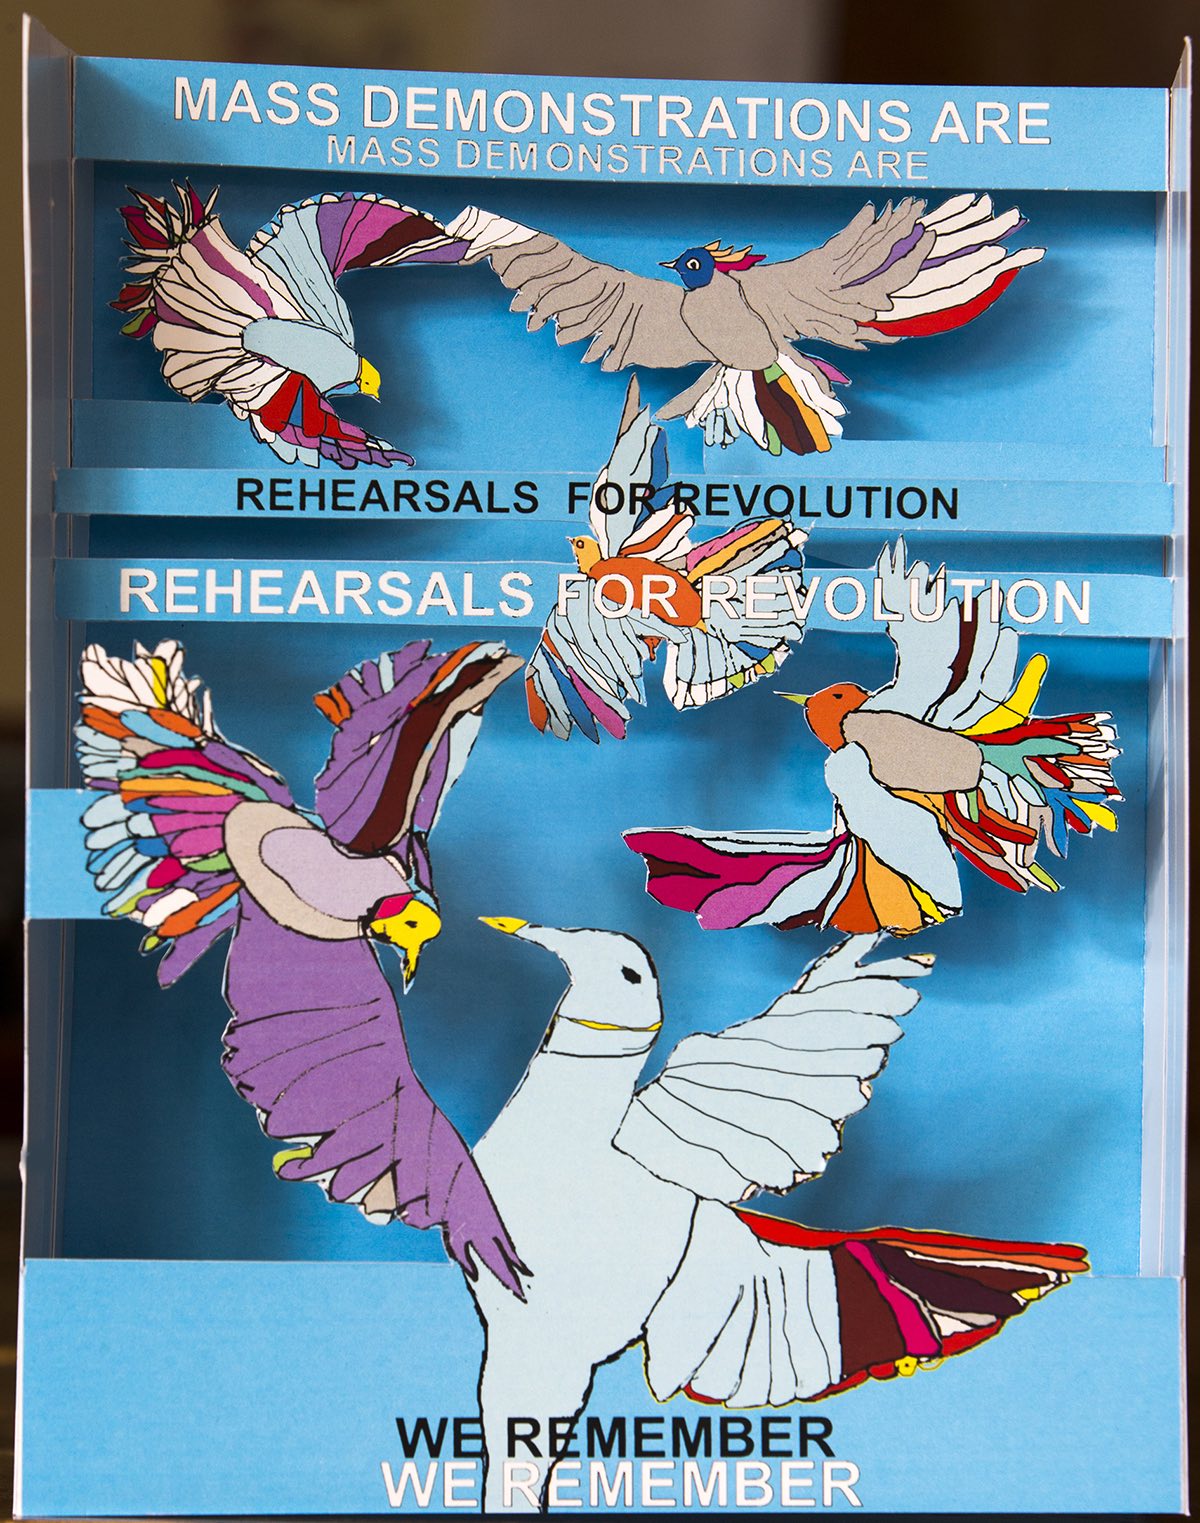 Pop-up depicting birds with the text "Mass demonstrations are rehearsals for revolution."